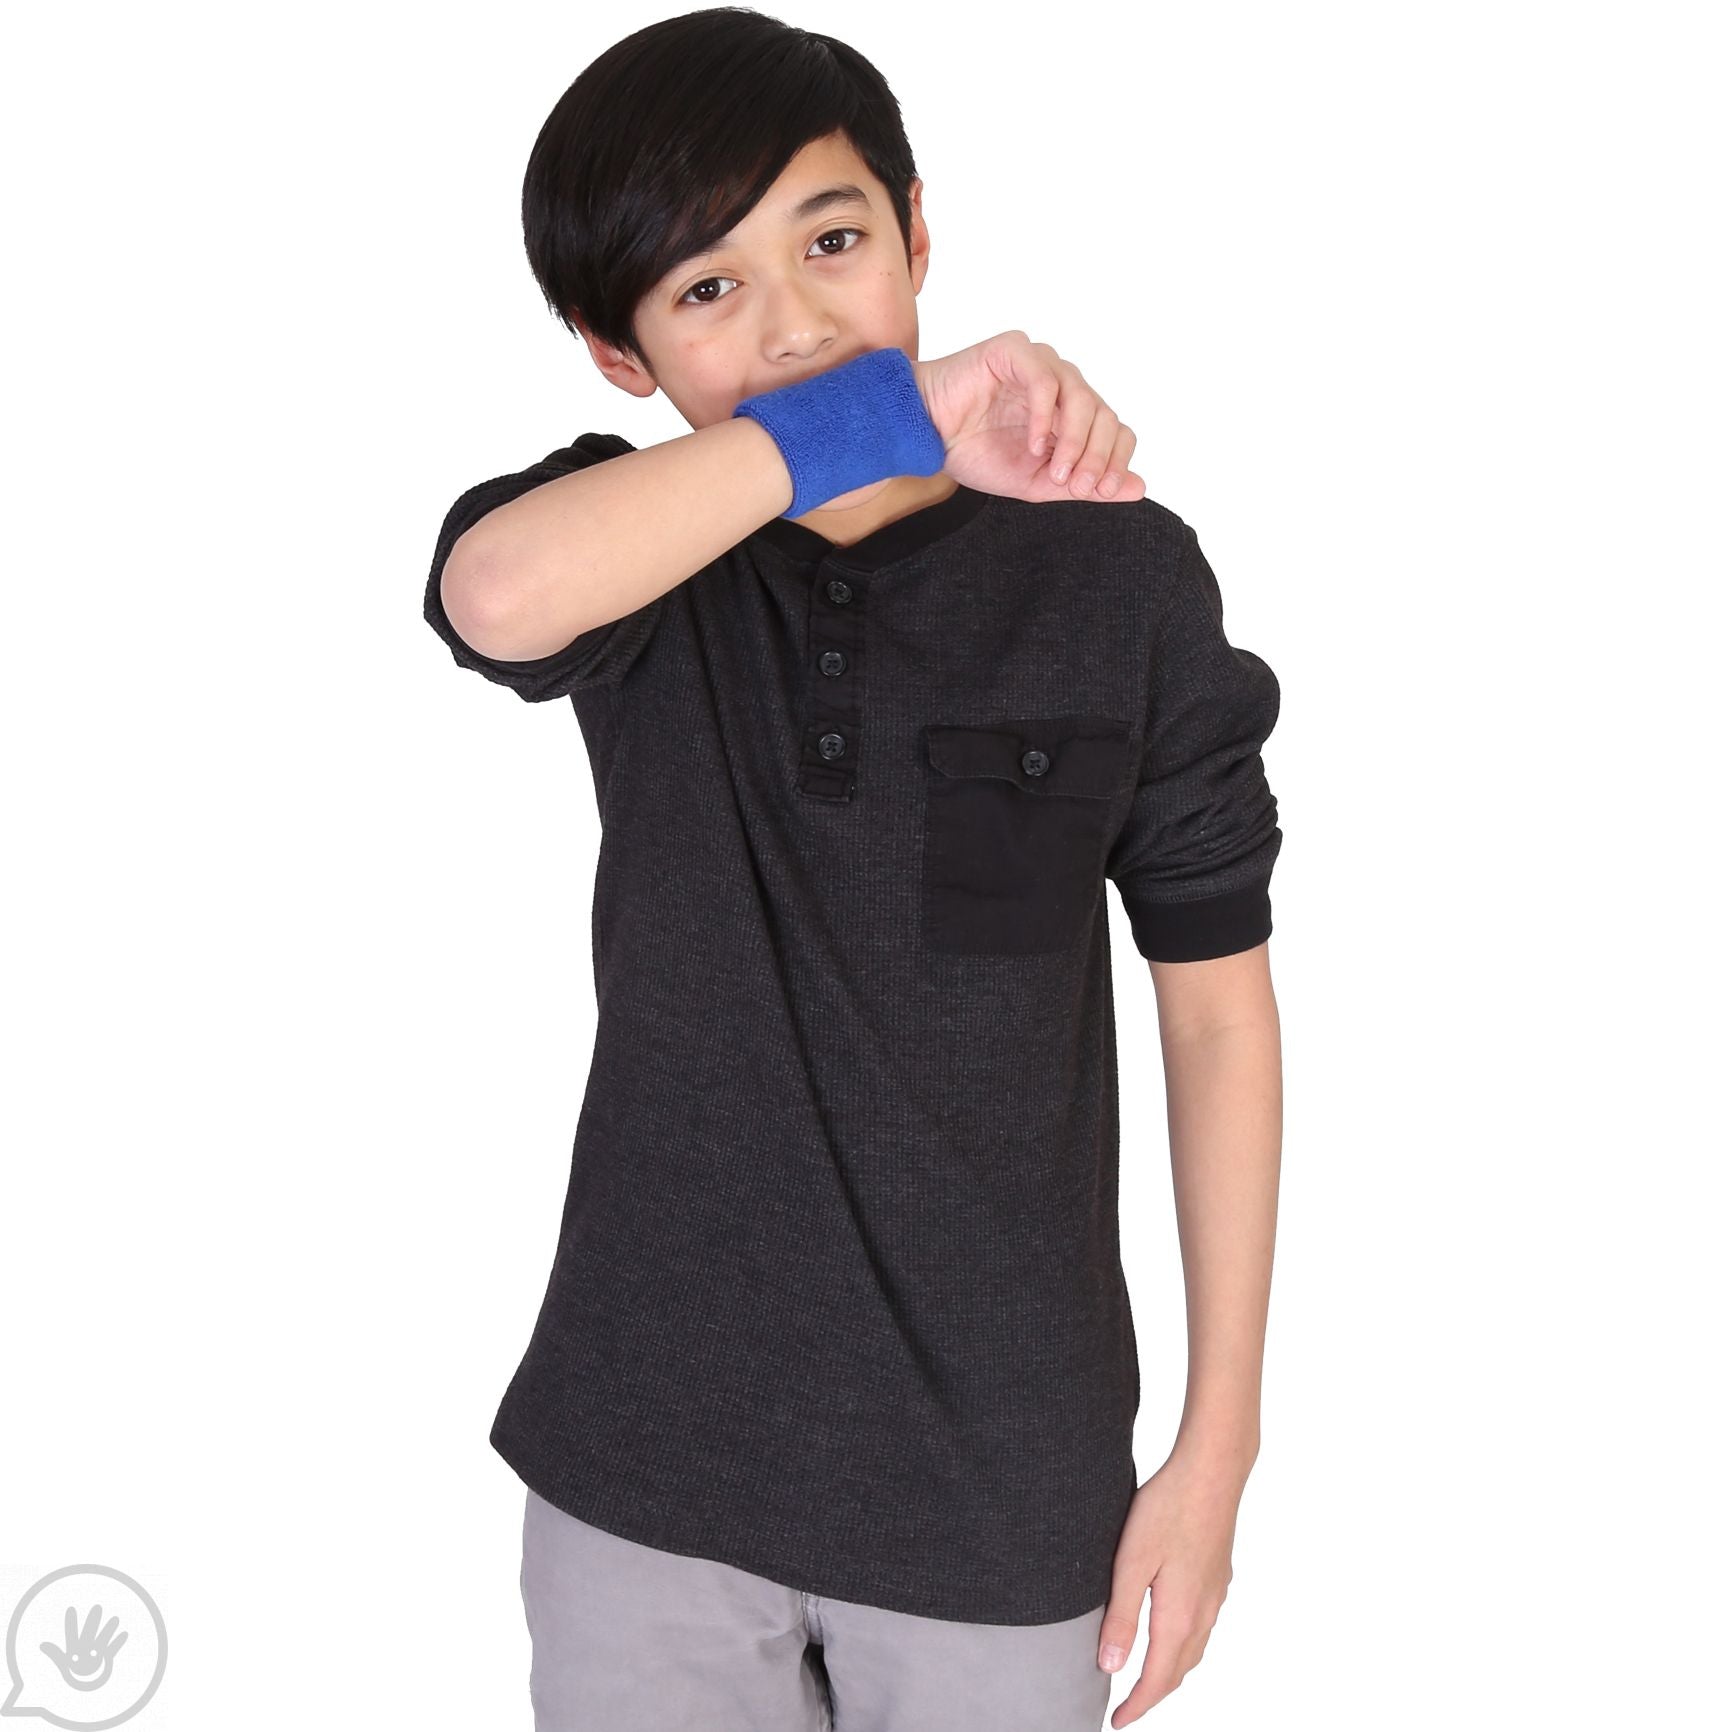 A child with light skin tone and short dark hair holds an wrist up to their mouth. They are wearing a Blue Chewy Wristband.